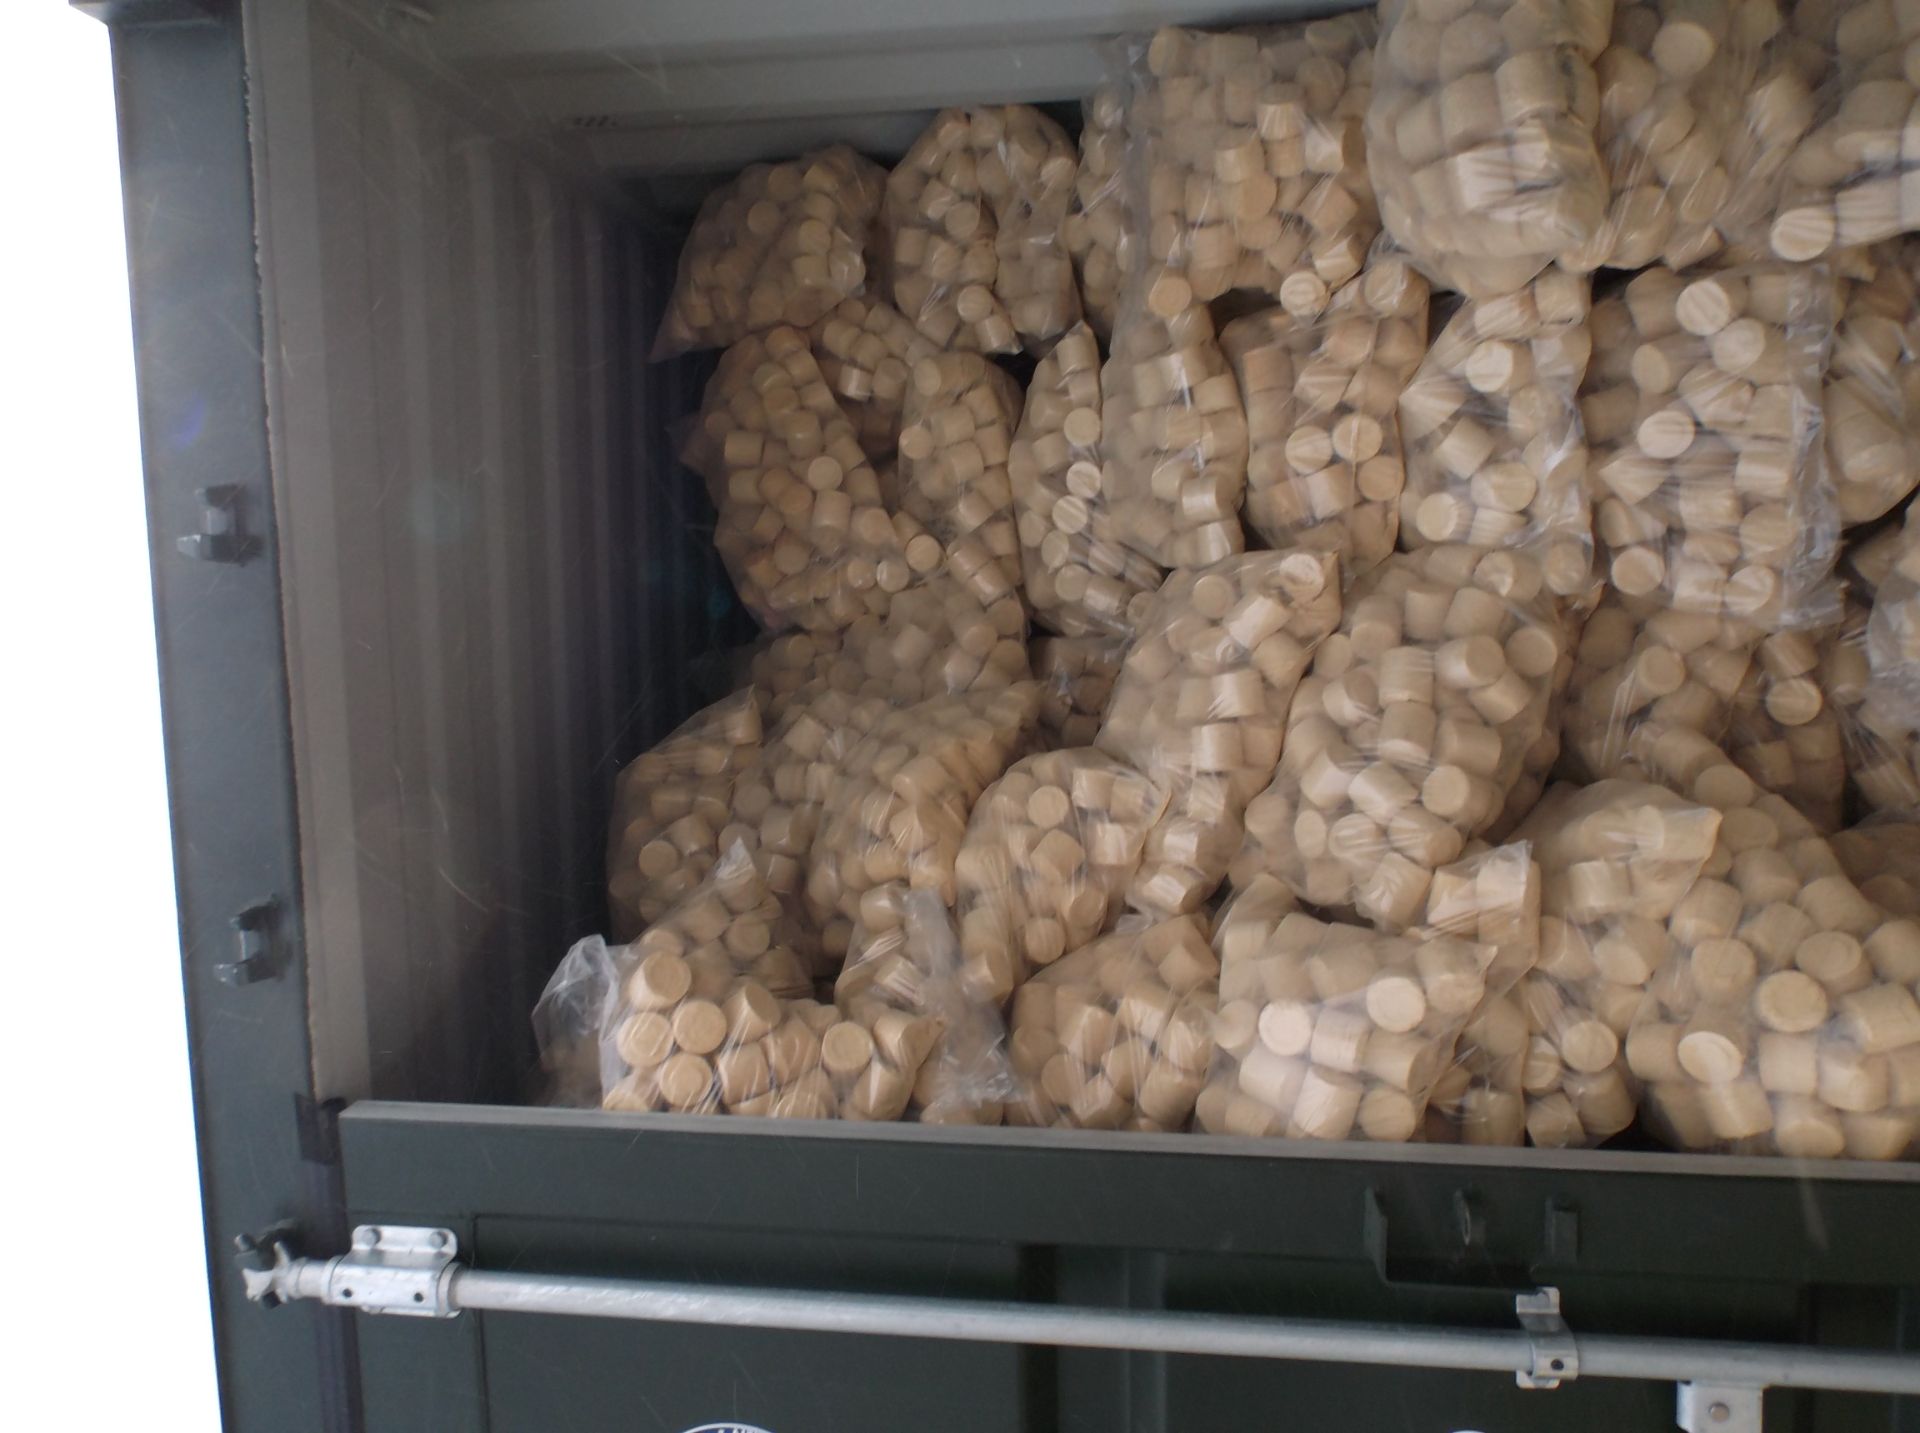 Approx 150 X 8Kg Bags Of Eco Hardwood Briquettes / Heat Logs Eco Stoves Fuel For Aga - Image 2 of 4